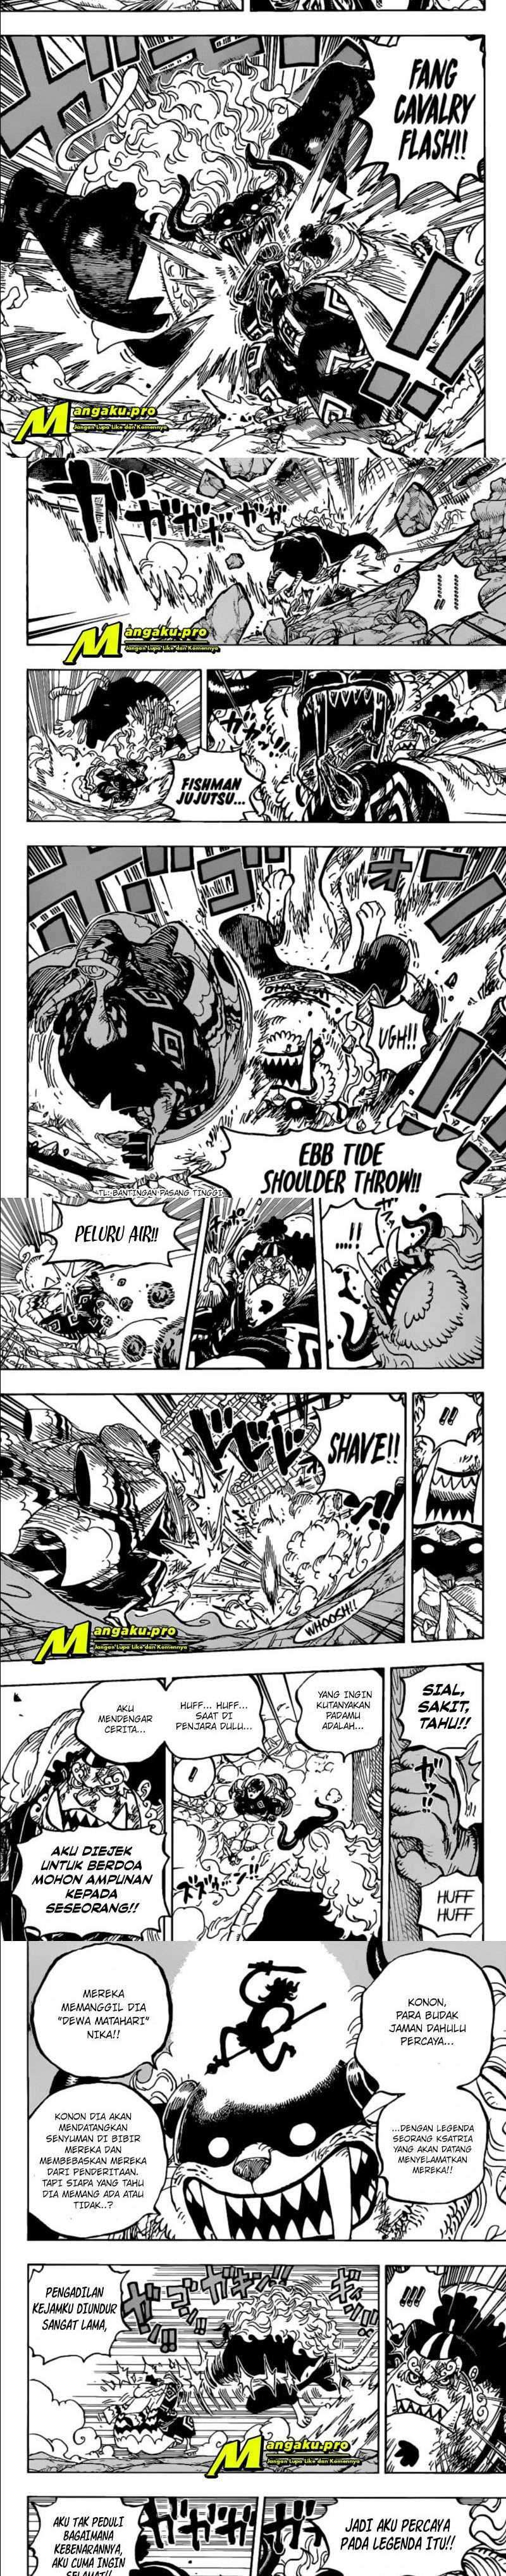 One Piece Chapter 1018 Hq - 35